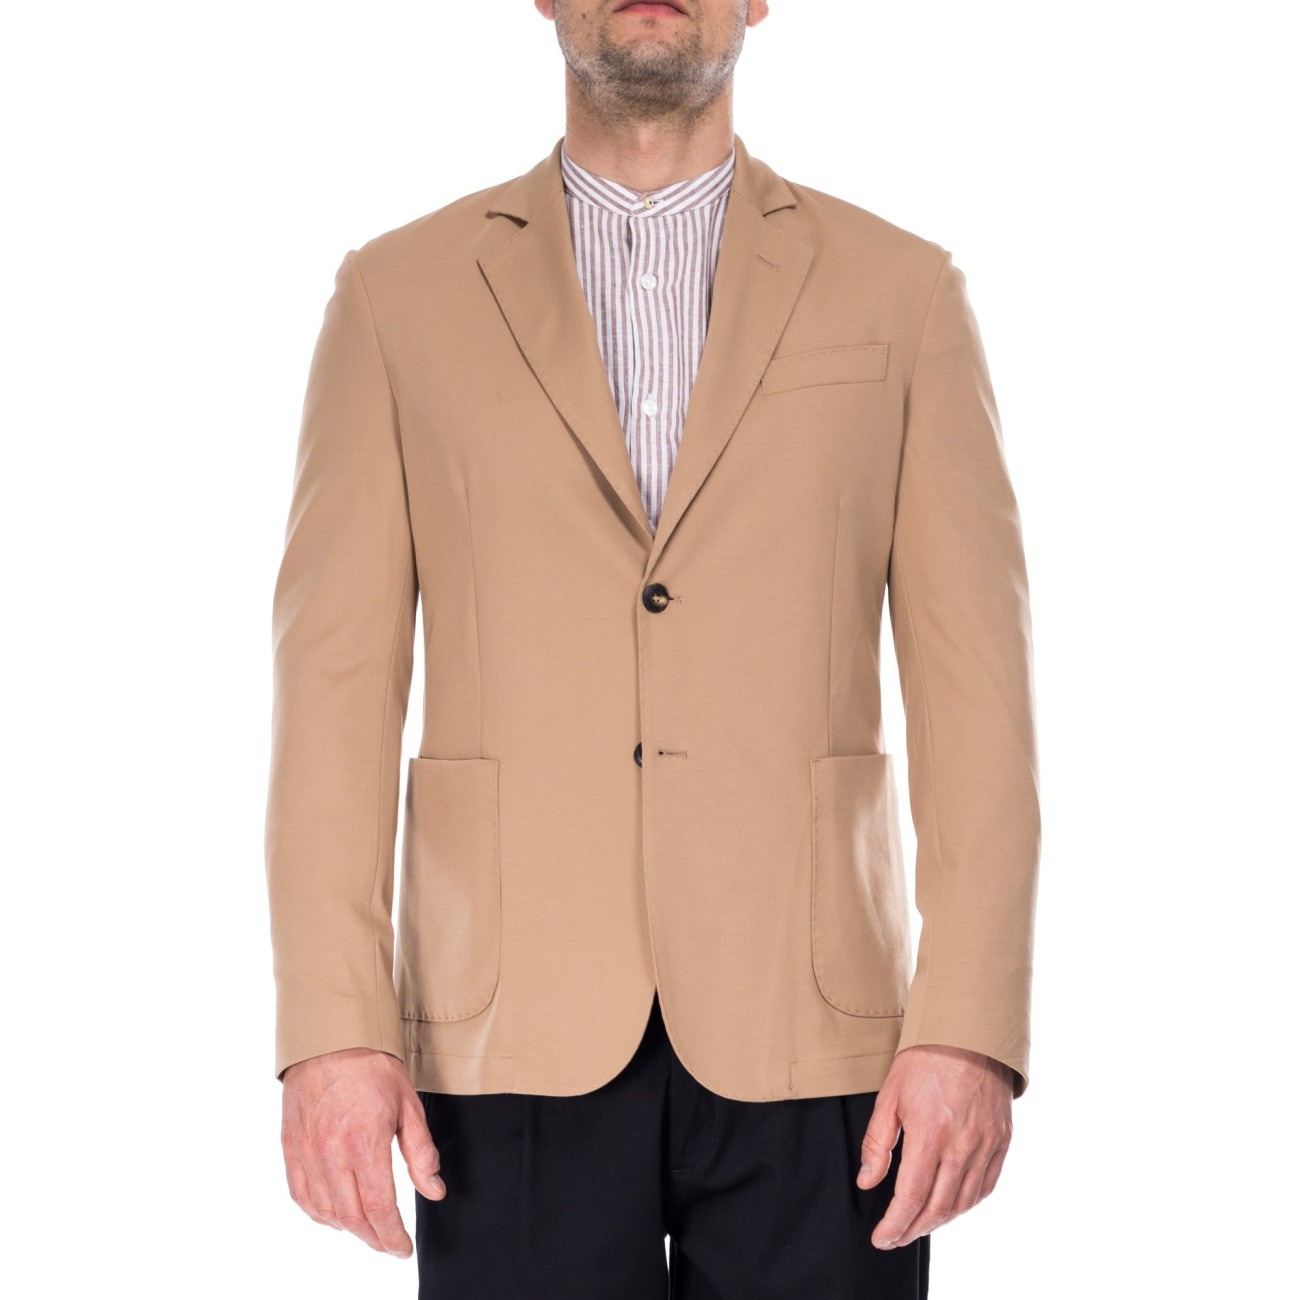 Beige unlined jacket outfit